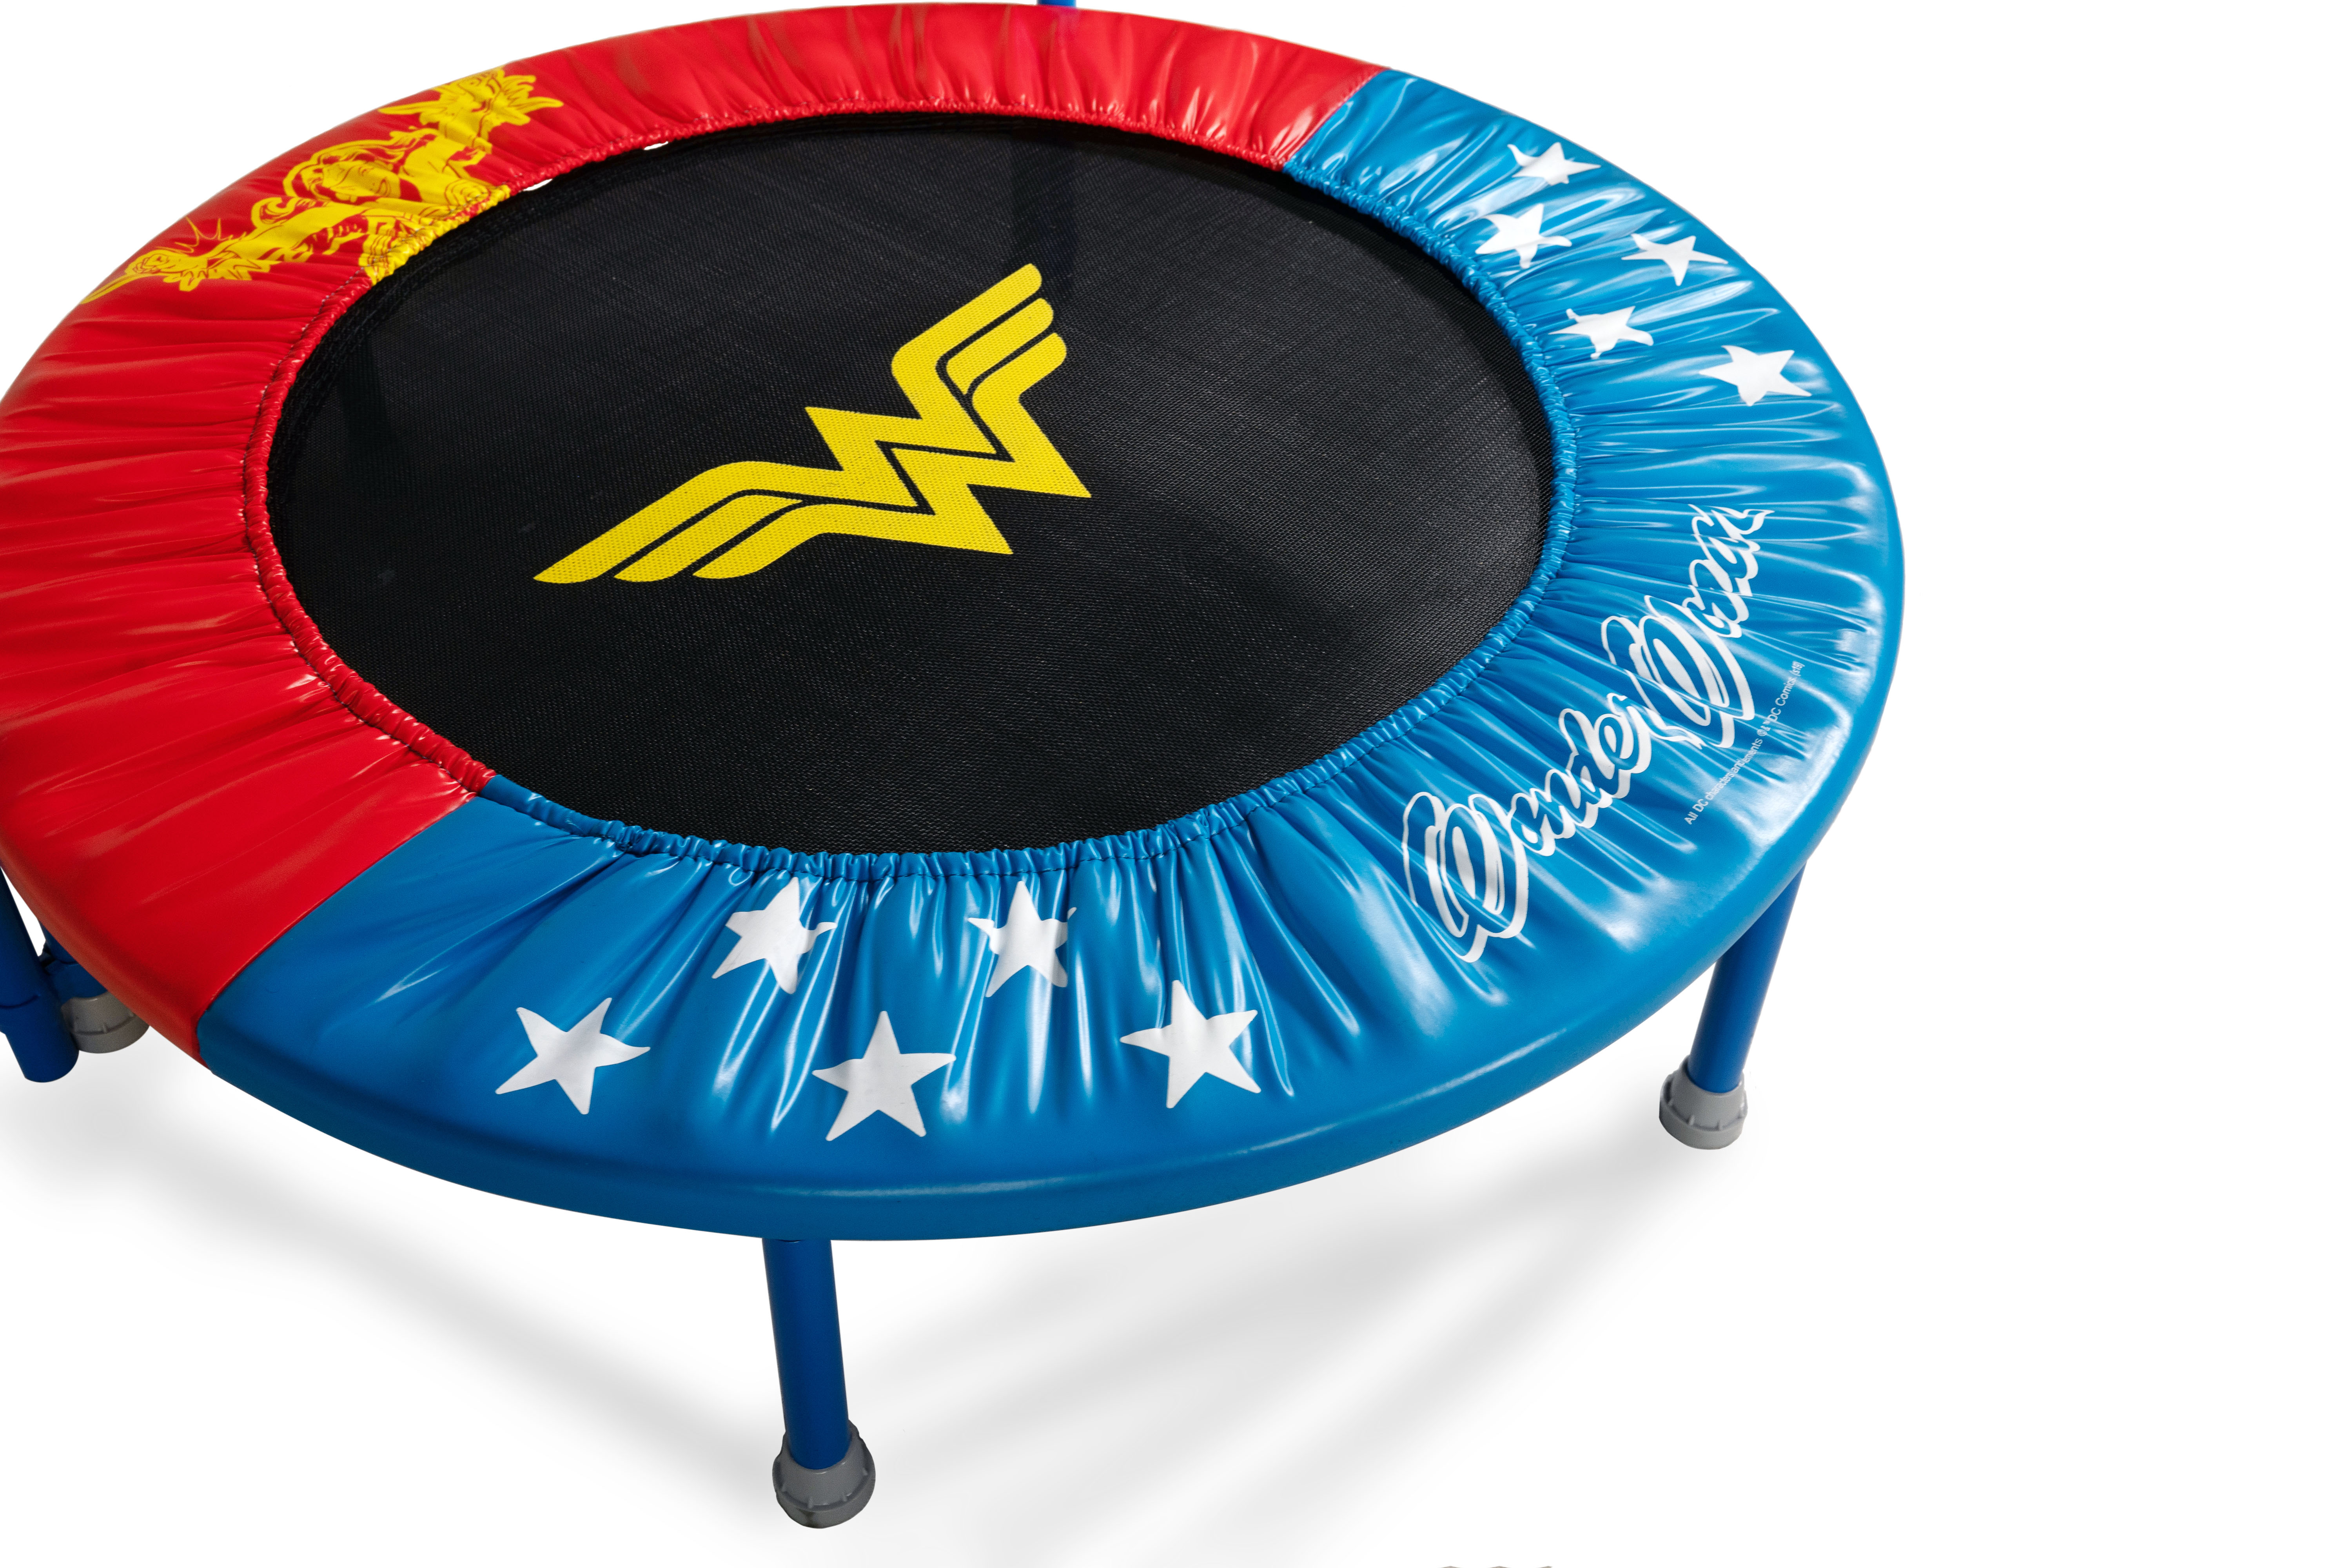 My First Wonder Woman 36-Inch Trampoline, with Handlebar - image 5 of 6